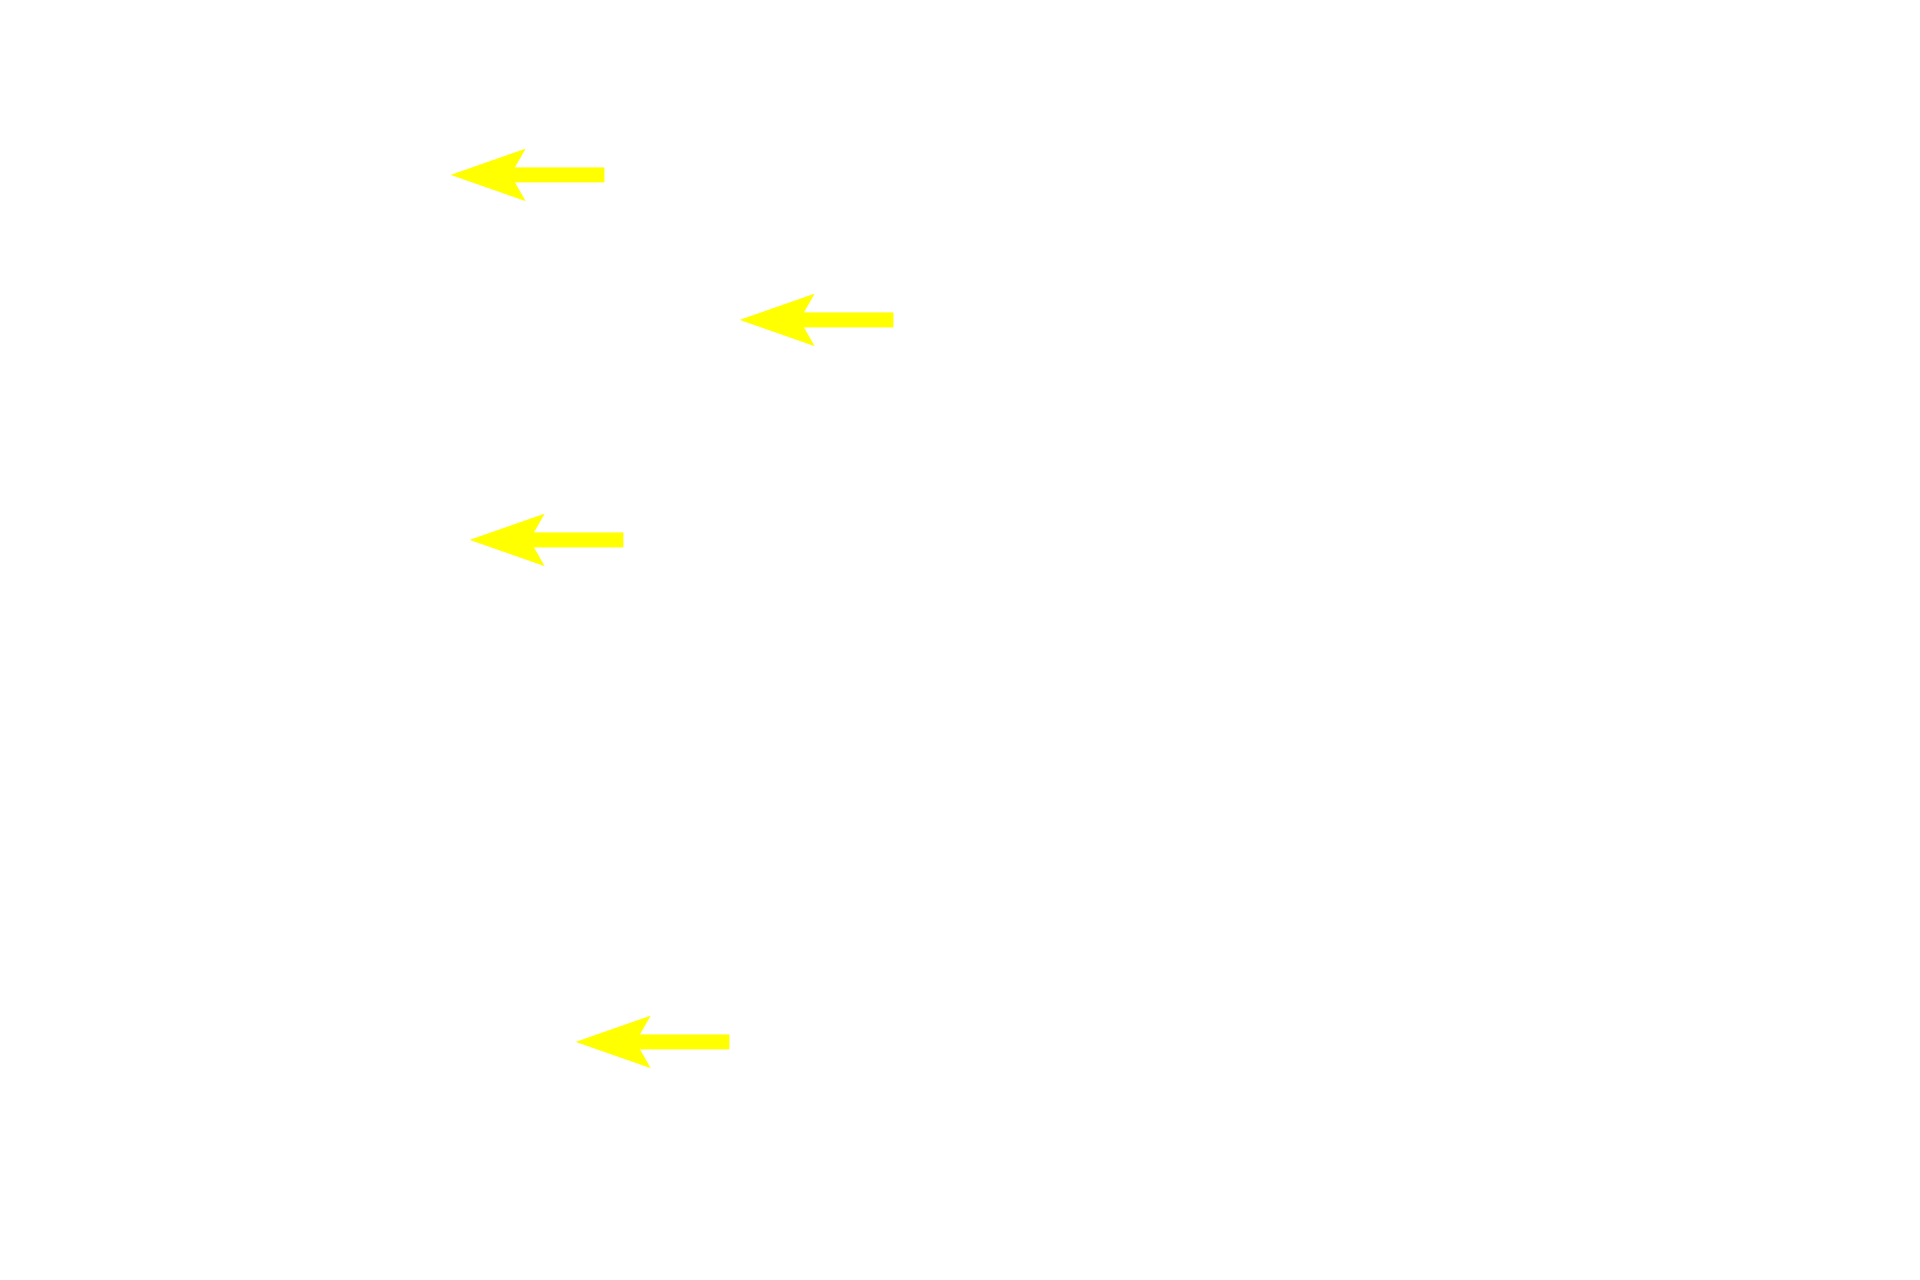 Microfilament bundles <p>The cytoskeleton consists of fibrous structures providing support, movement and intracellular transport.  Components include microfilaments (4-6 nm), intermediate filaments (8-10 nm) and microtubules (20-25 nm).  Microfilaments and microtubules are similar in all cells, while intermediate filaments are heterogeneous and cell-type specific.  800x, 1000x</p>
